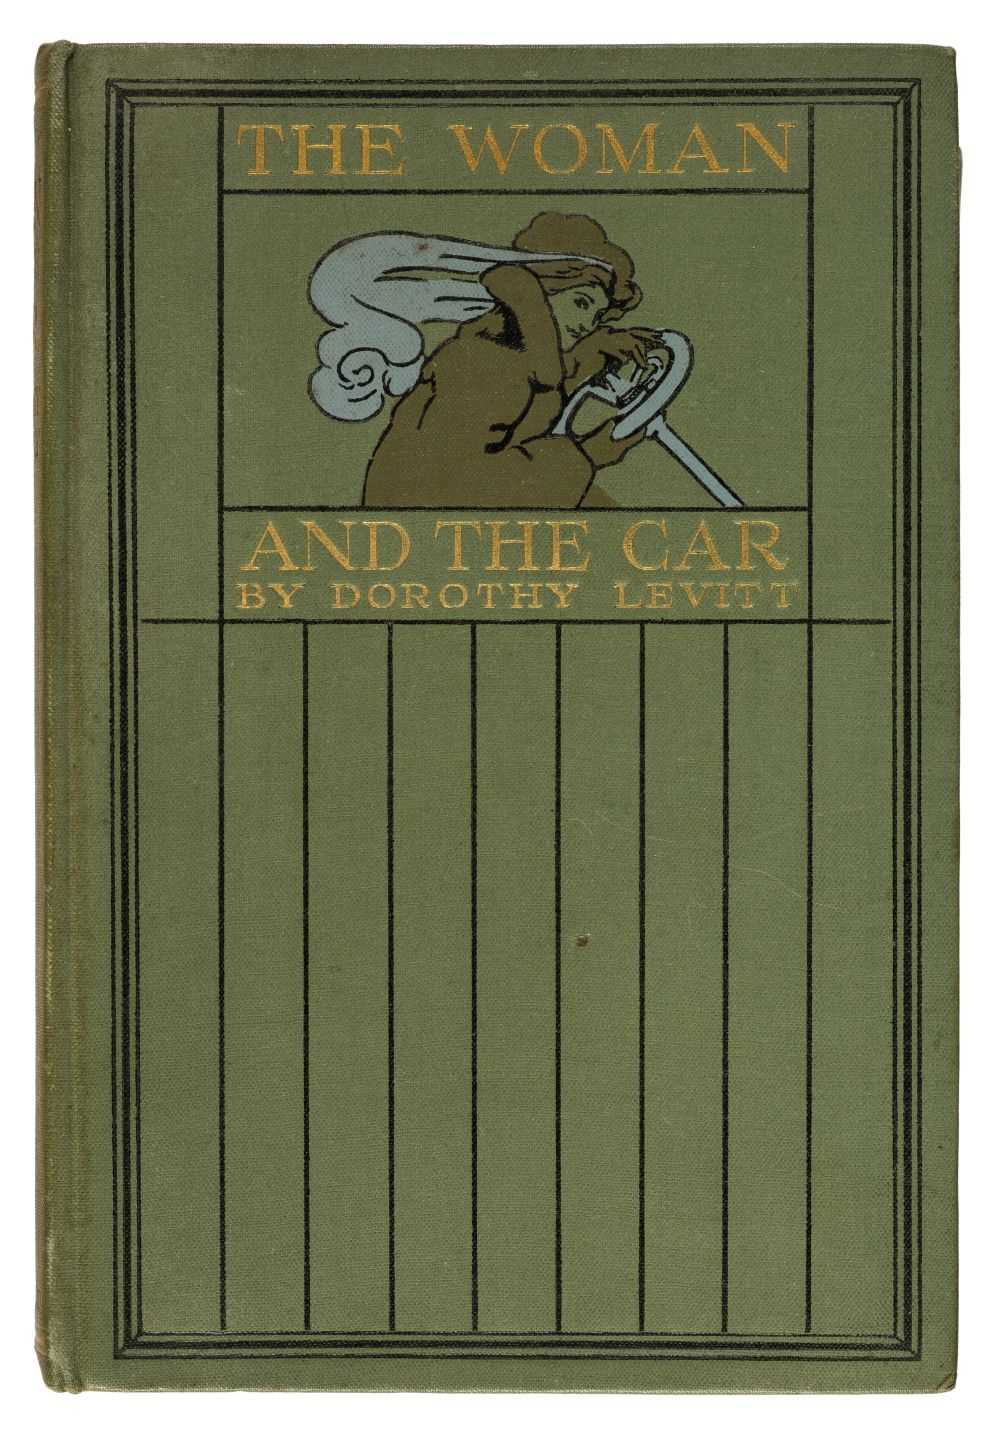 Lot 55 - Levitt (Dorothy). The Woman and the Car, 1909, & others